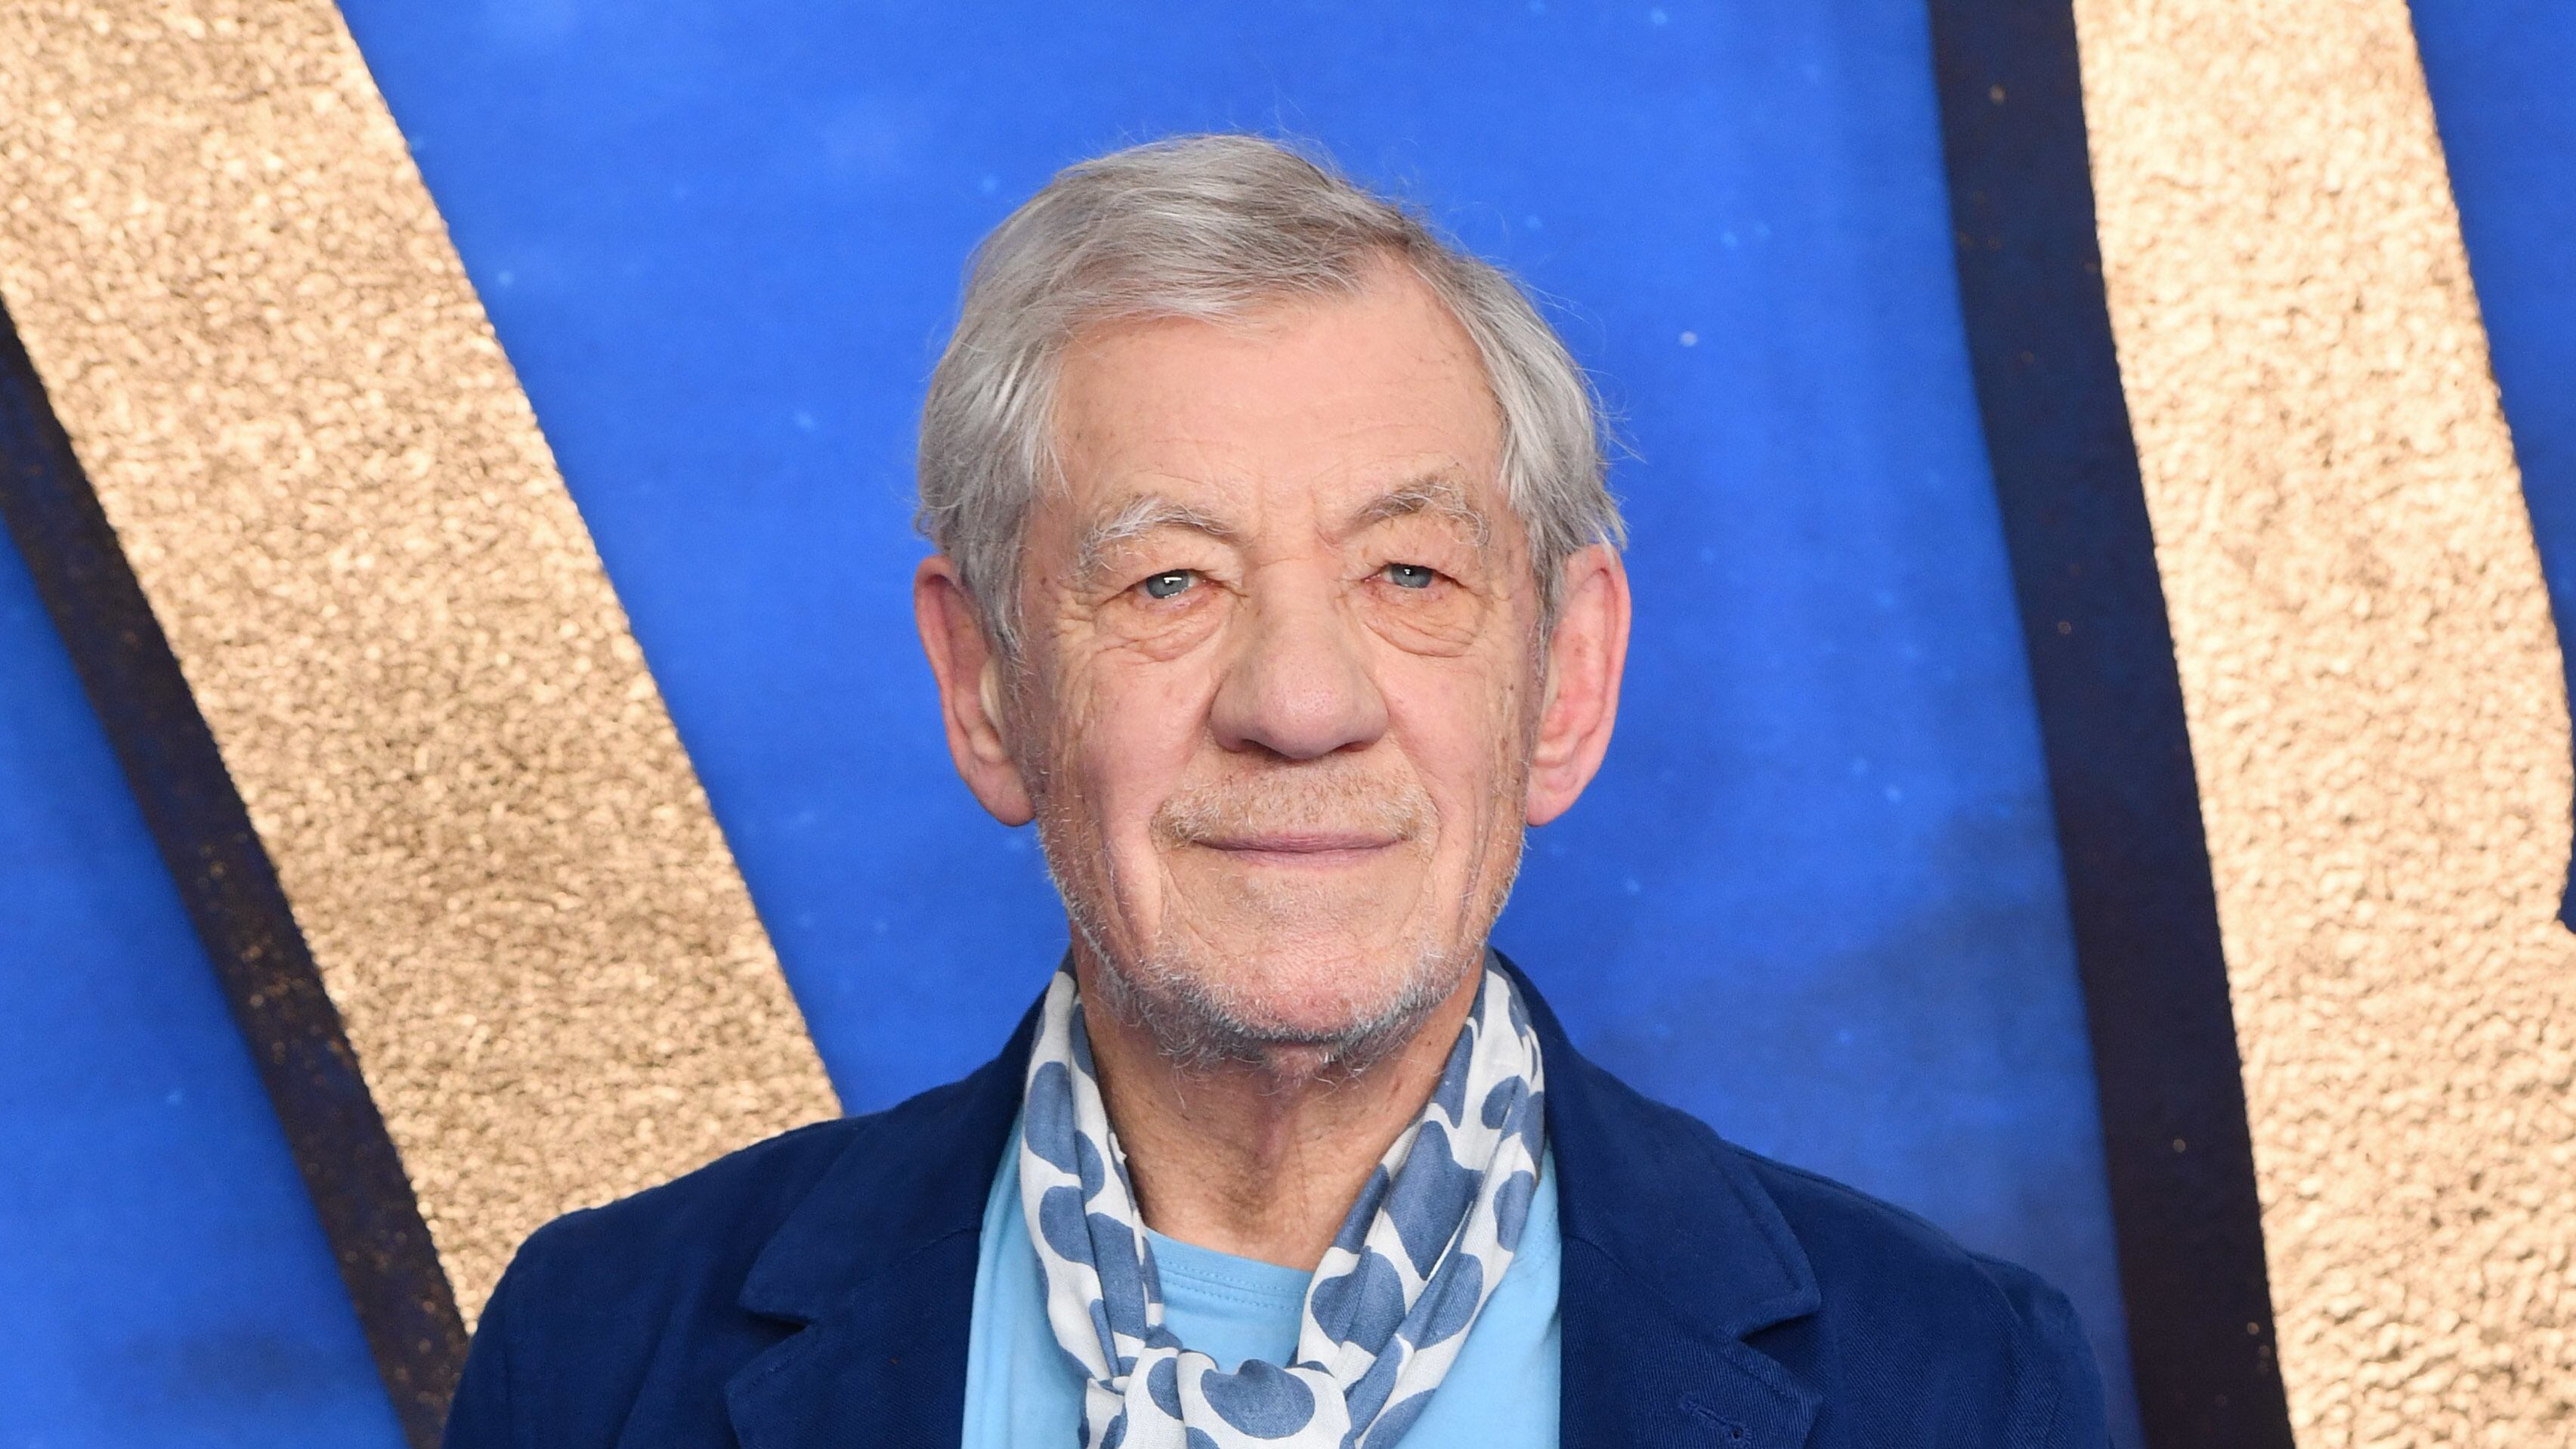 Sir Ian McKellen is ‘recovering well’ but his West End show will be cancelled on Wednesday after he fell from the stage earlier this week